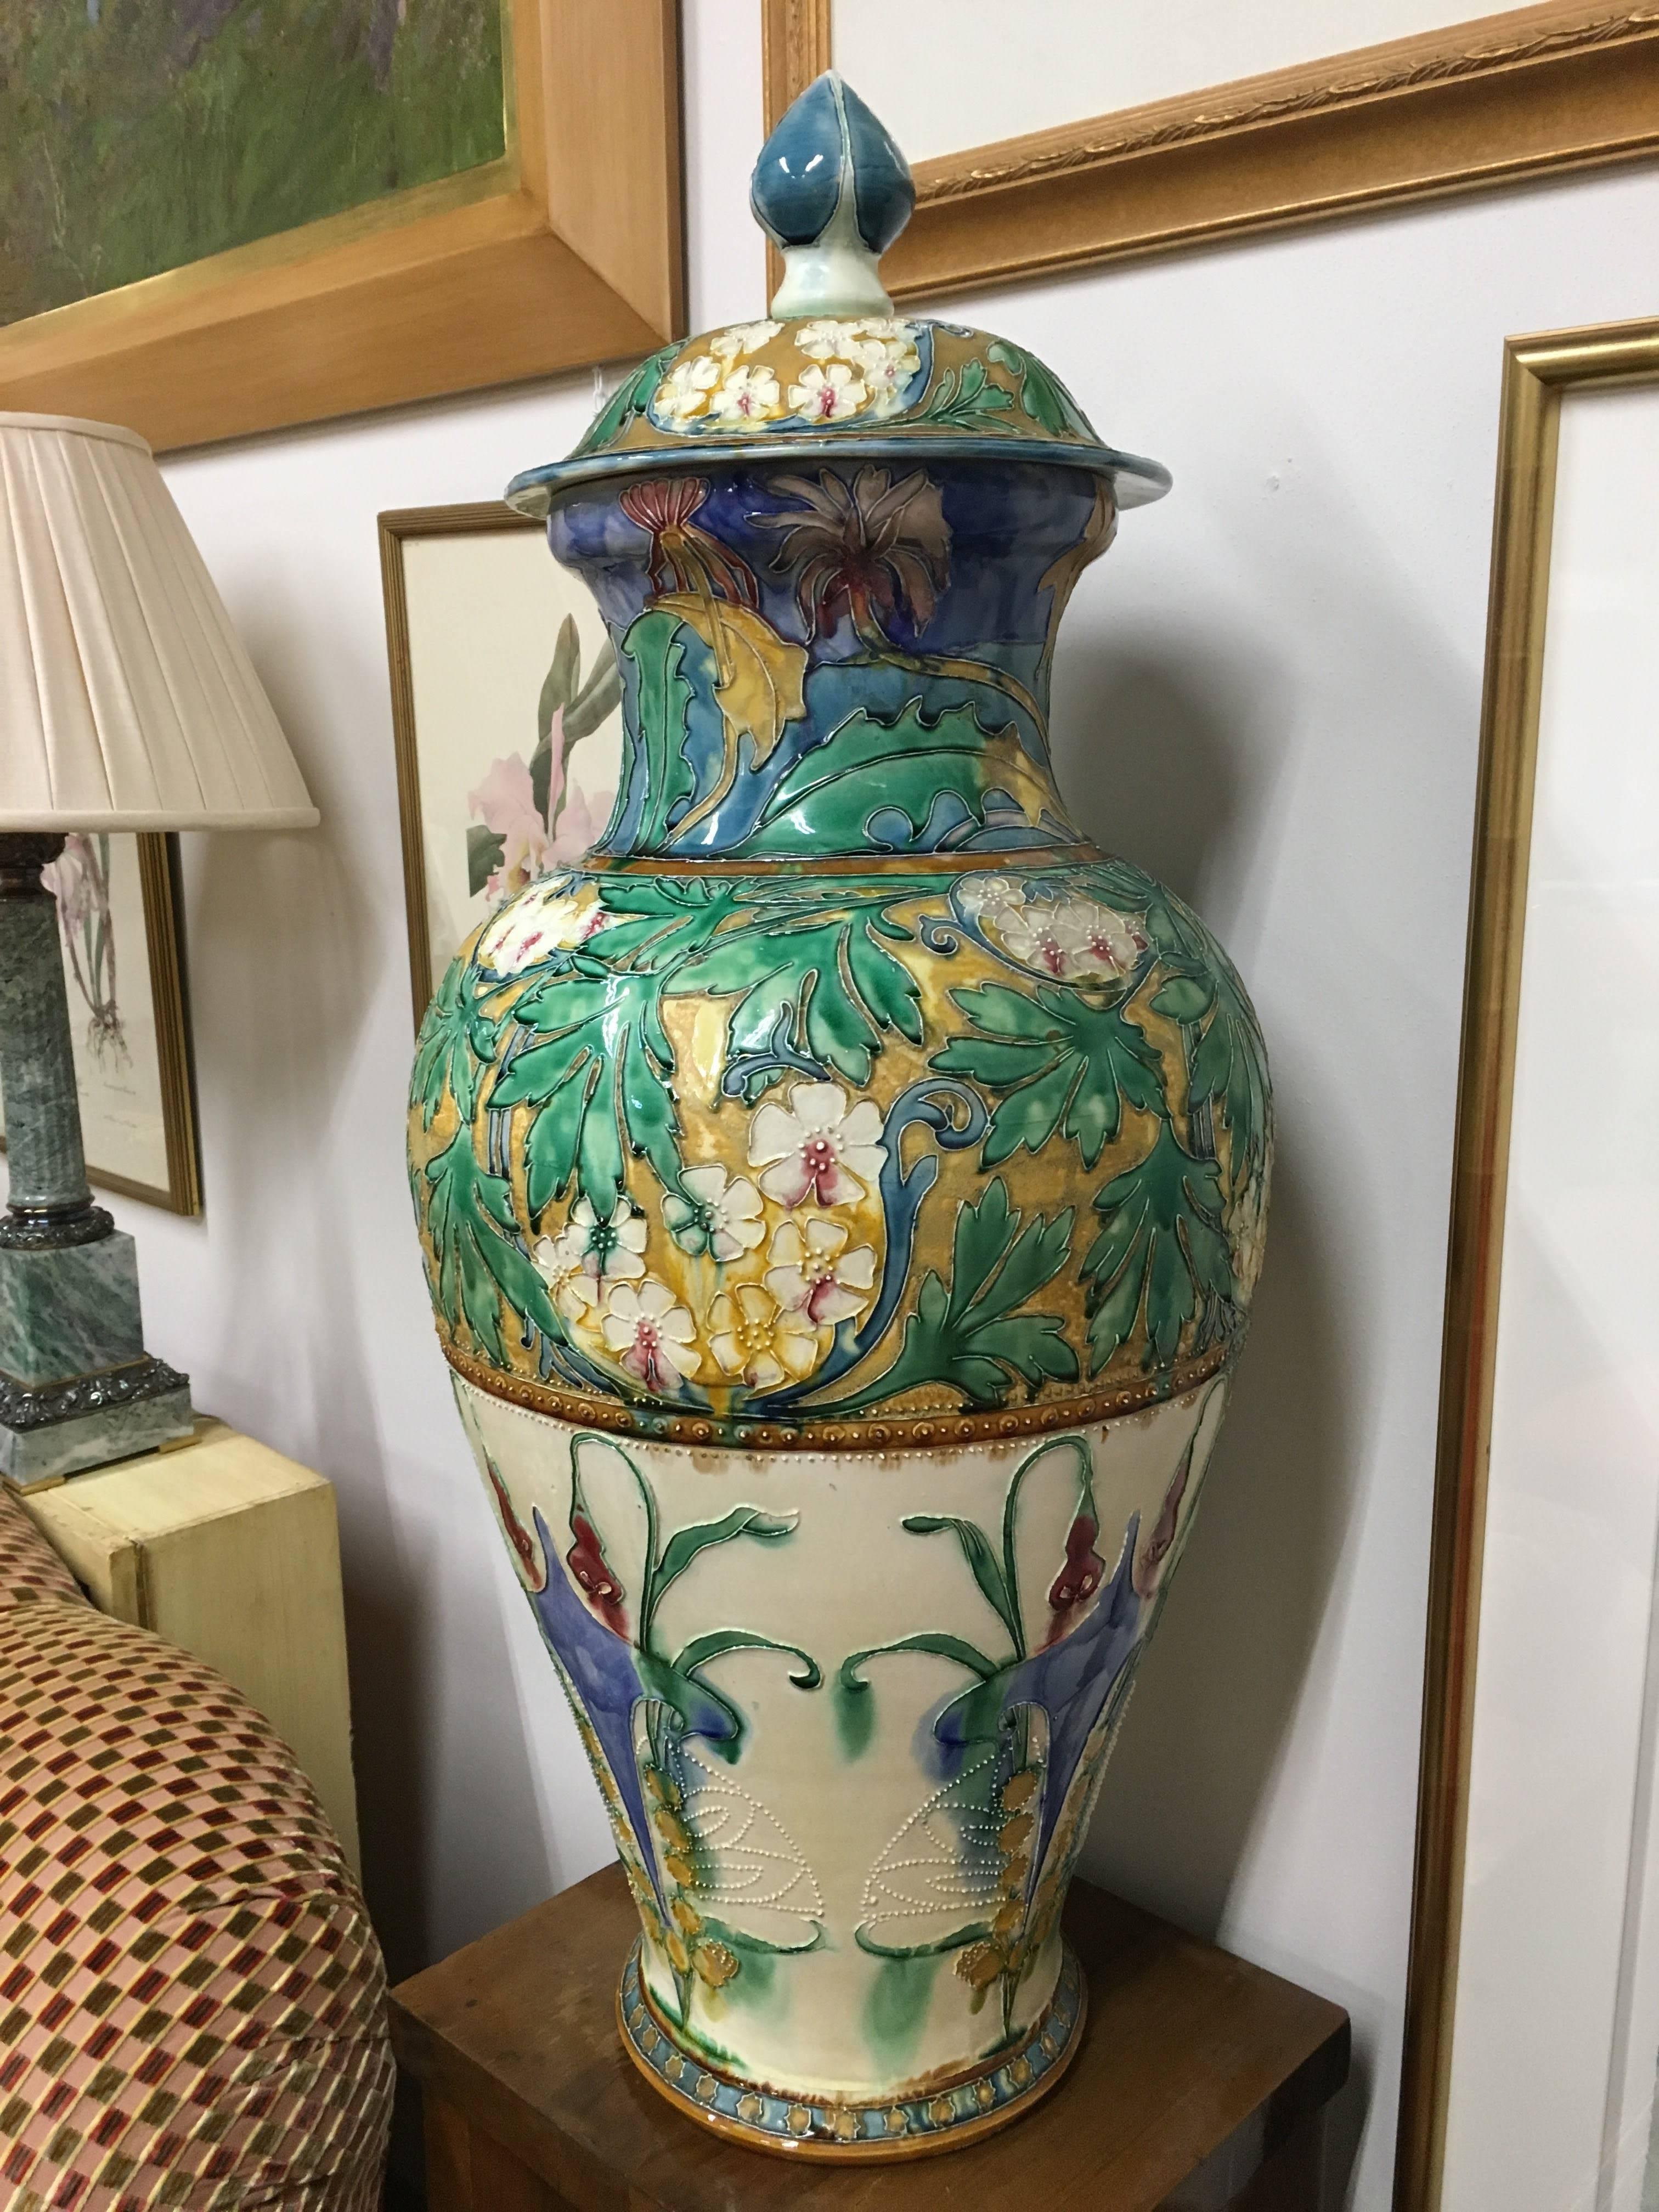 Oversized late 19th century Portuguese Palissy ware covered vase elaborately decorated in the Art Nouveau style featuring translucent applied enamel depictions of florals, twining greenery and fresh blooms in the highly-desired earthy muted jewel